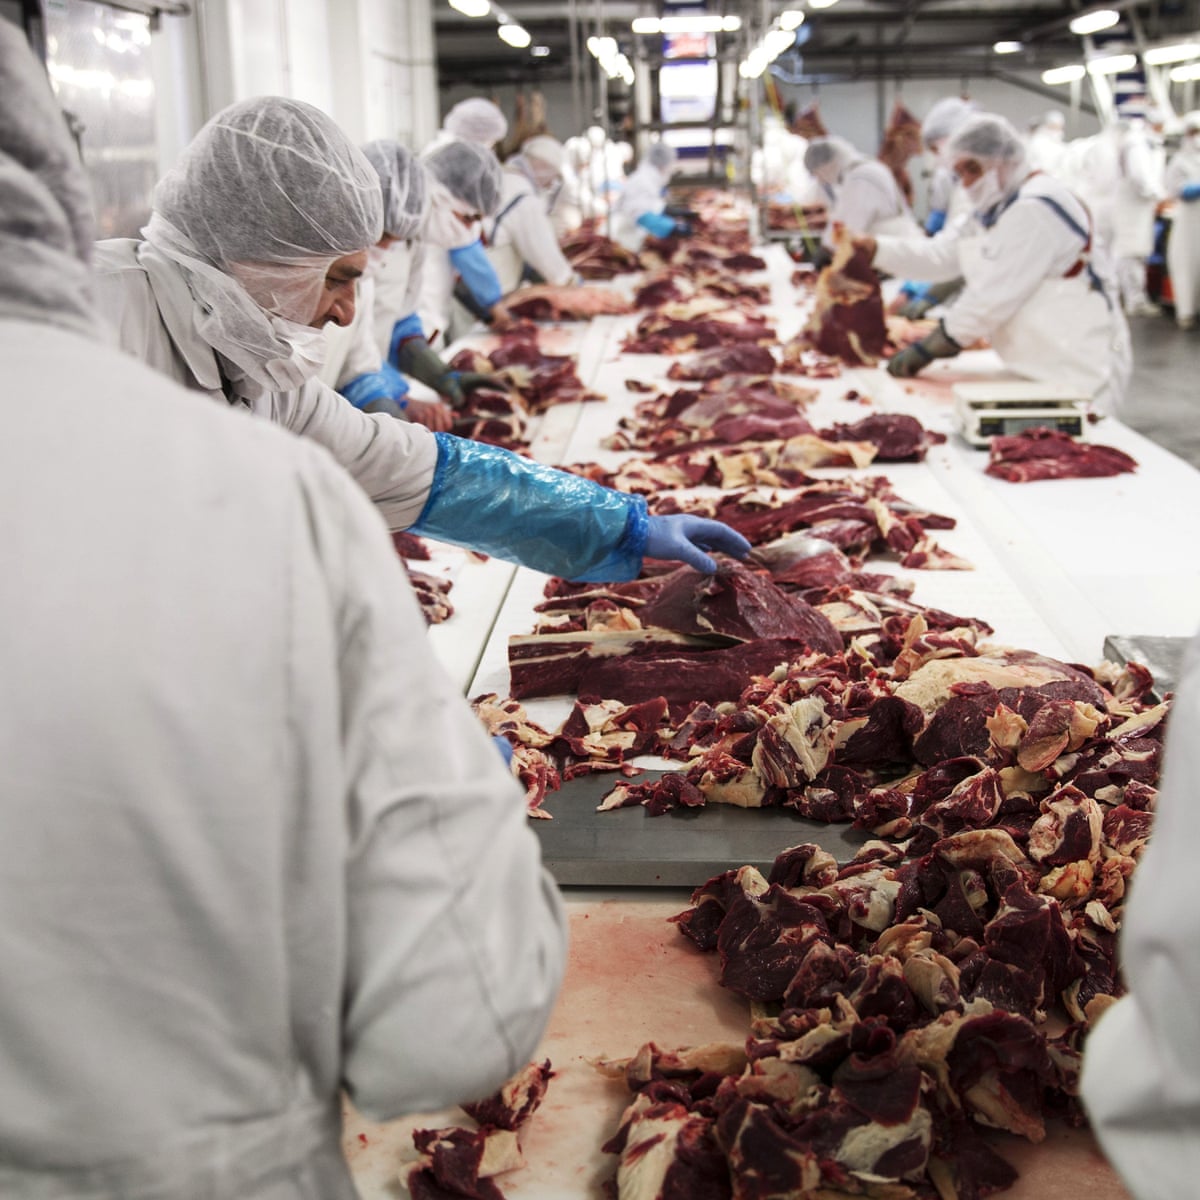 The whole system is rotten': life inside Europe's meat industry | Meat  industry | The Guardian